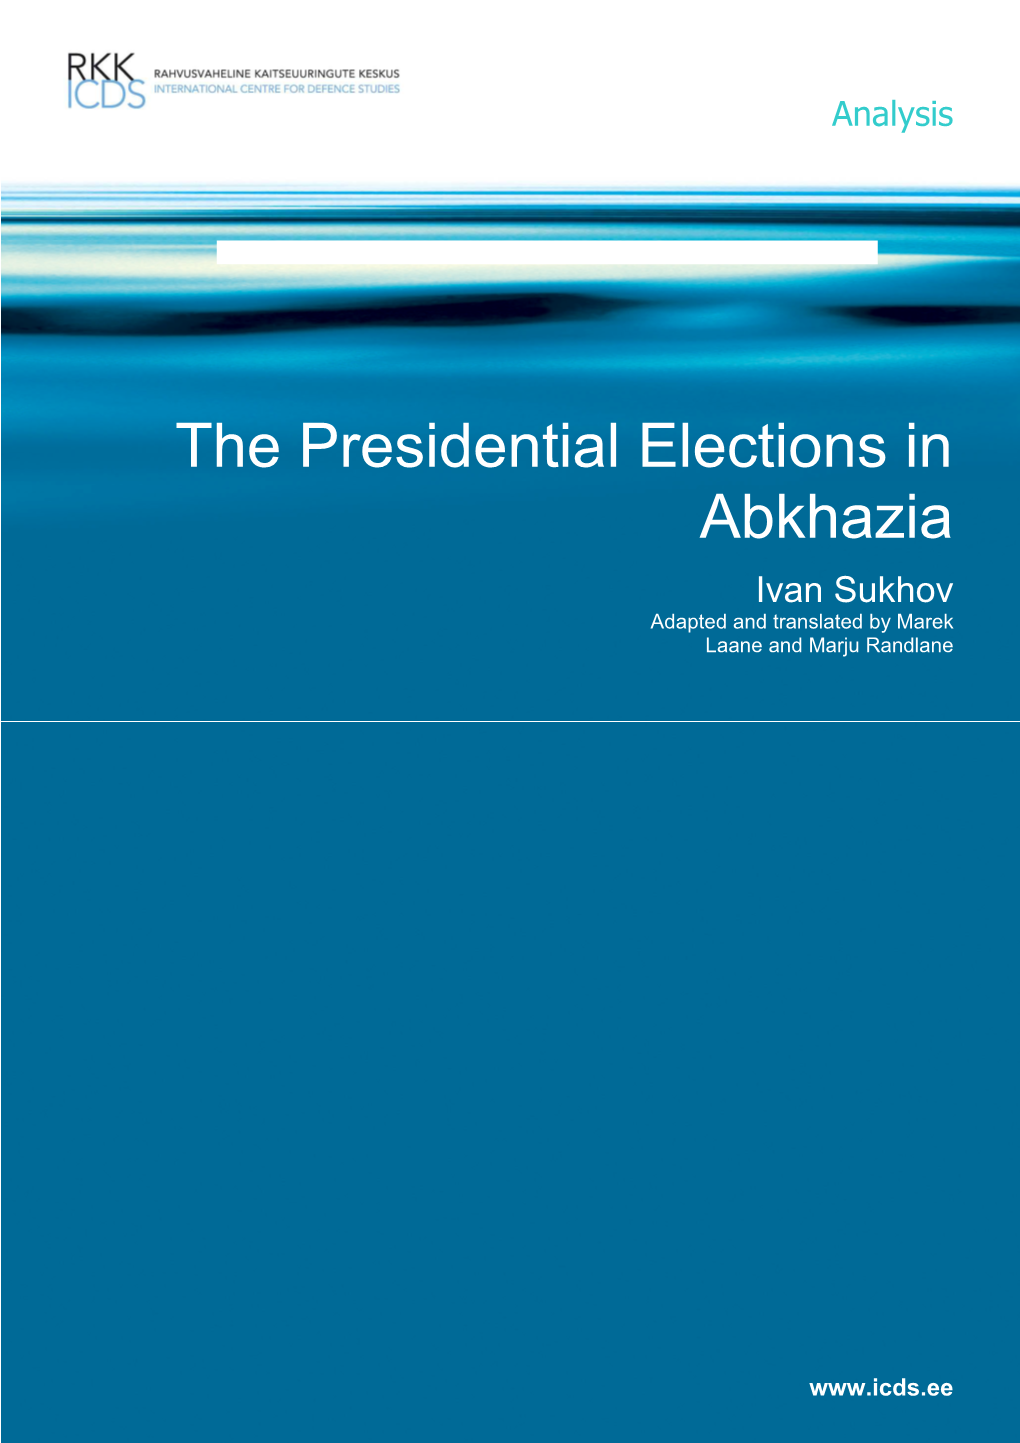 Elections in Abkhazia, Executive Summary in English